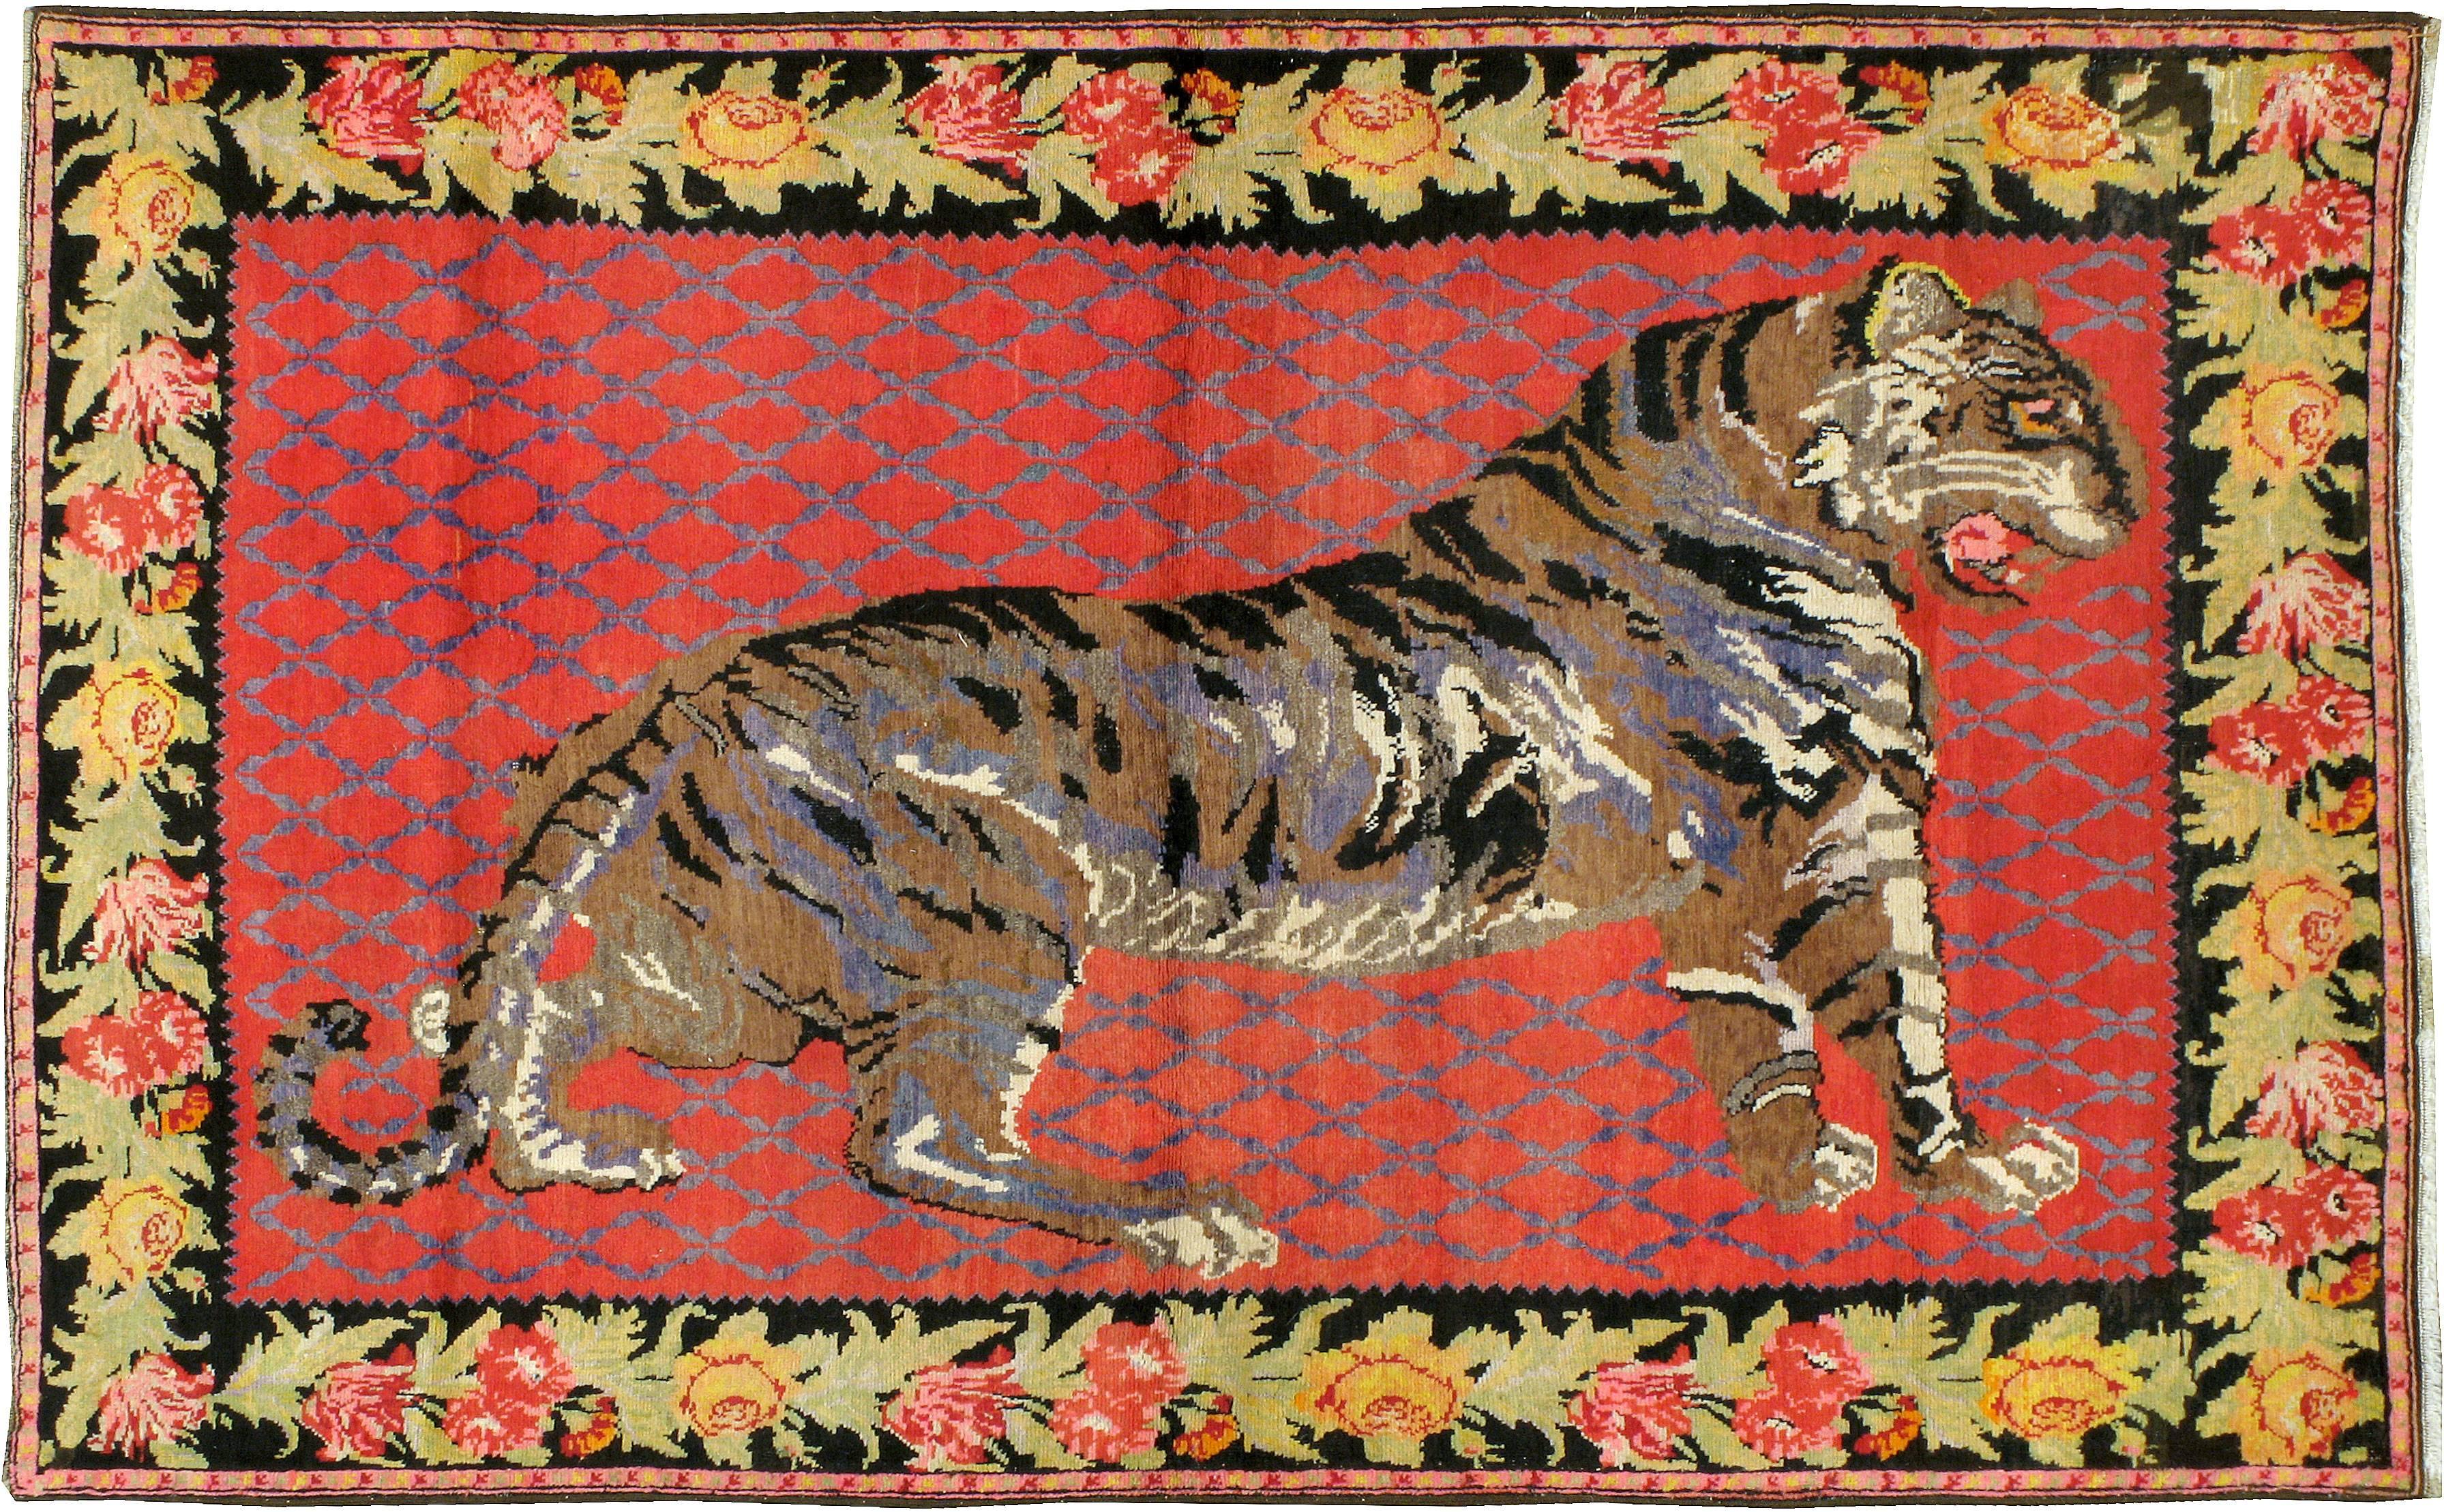 An antique Russian Karabagh carpet from the first quarter of the 20th century with a pictorial design of a tiger.